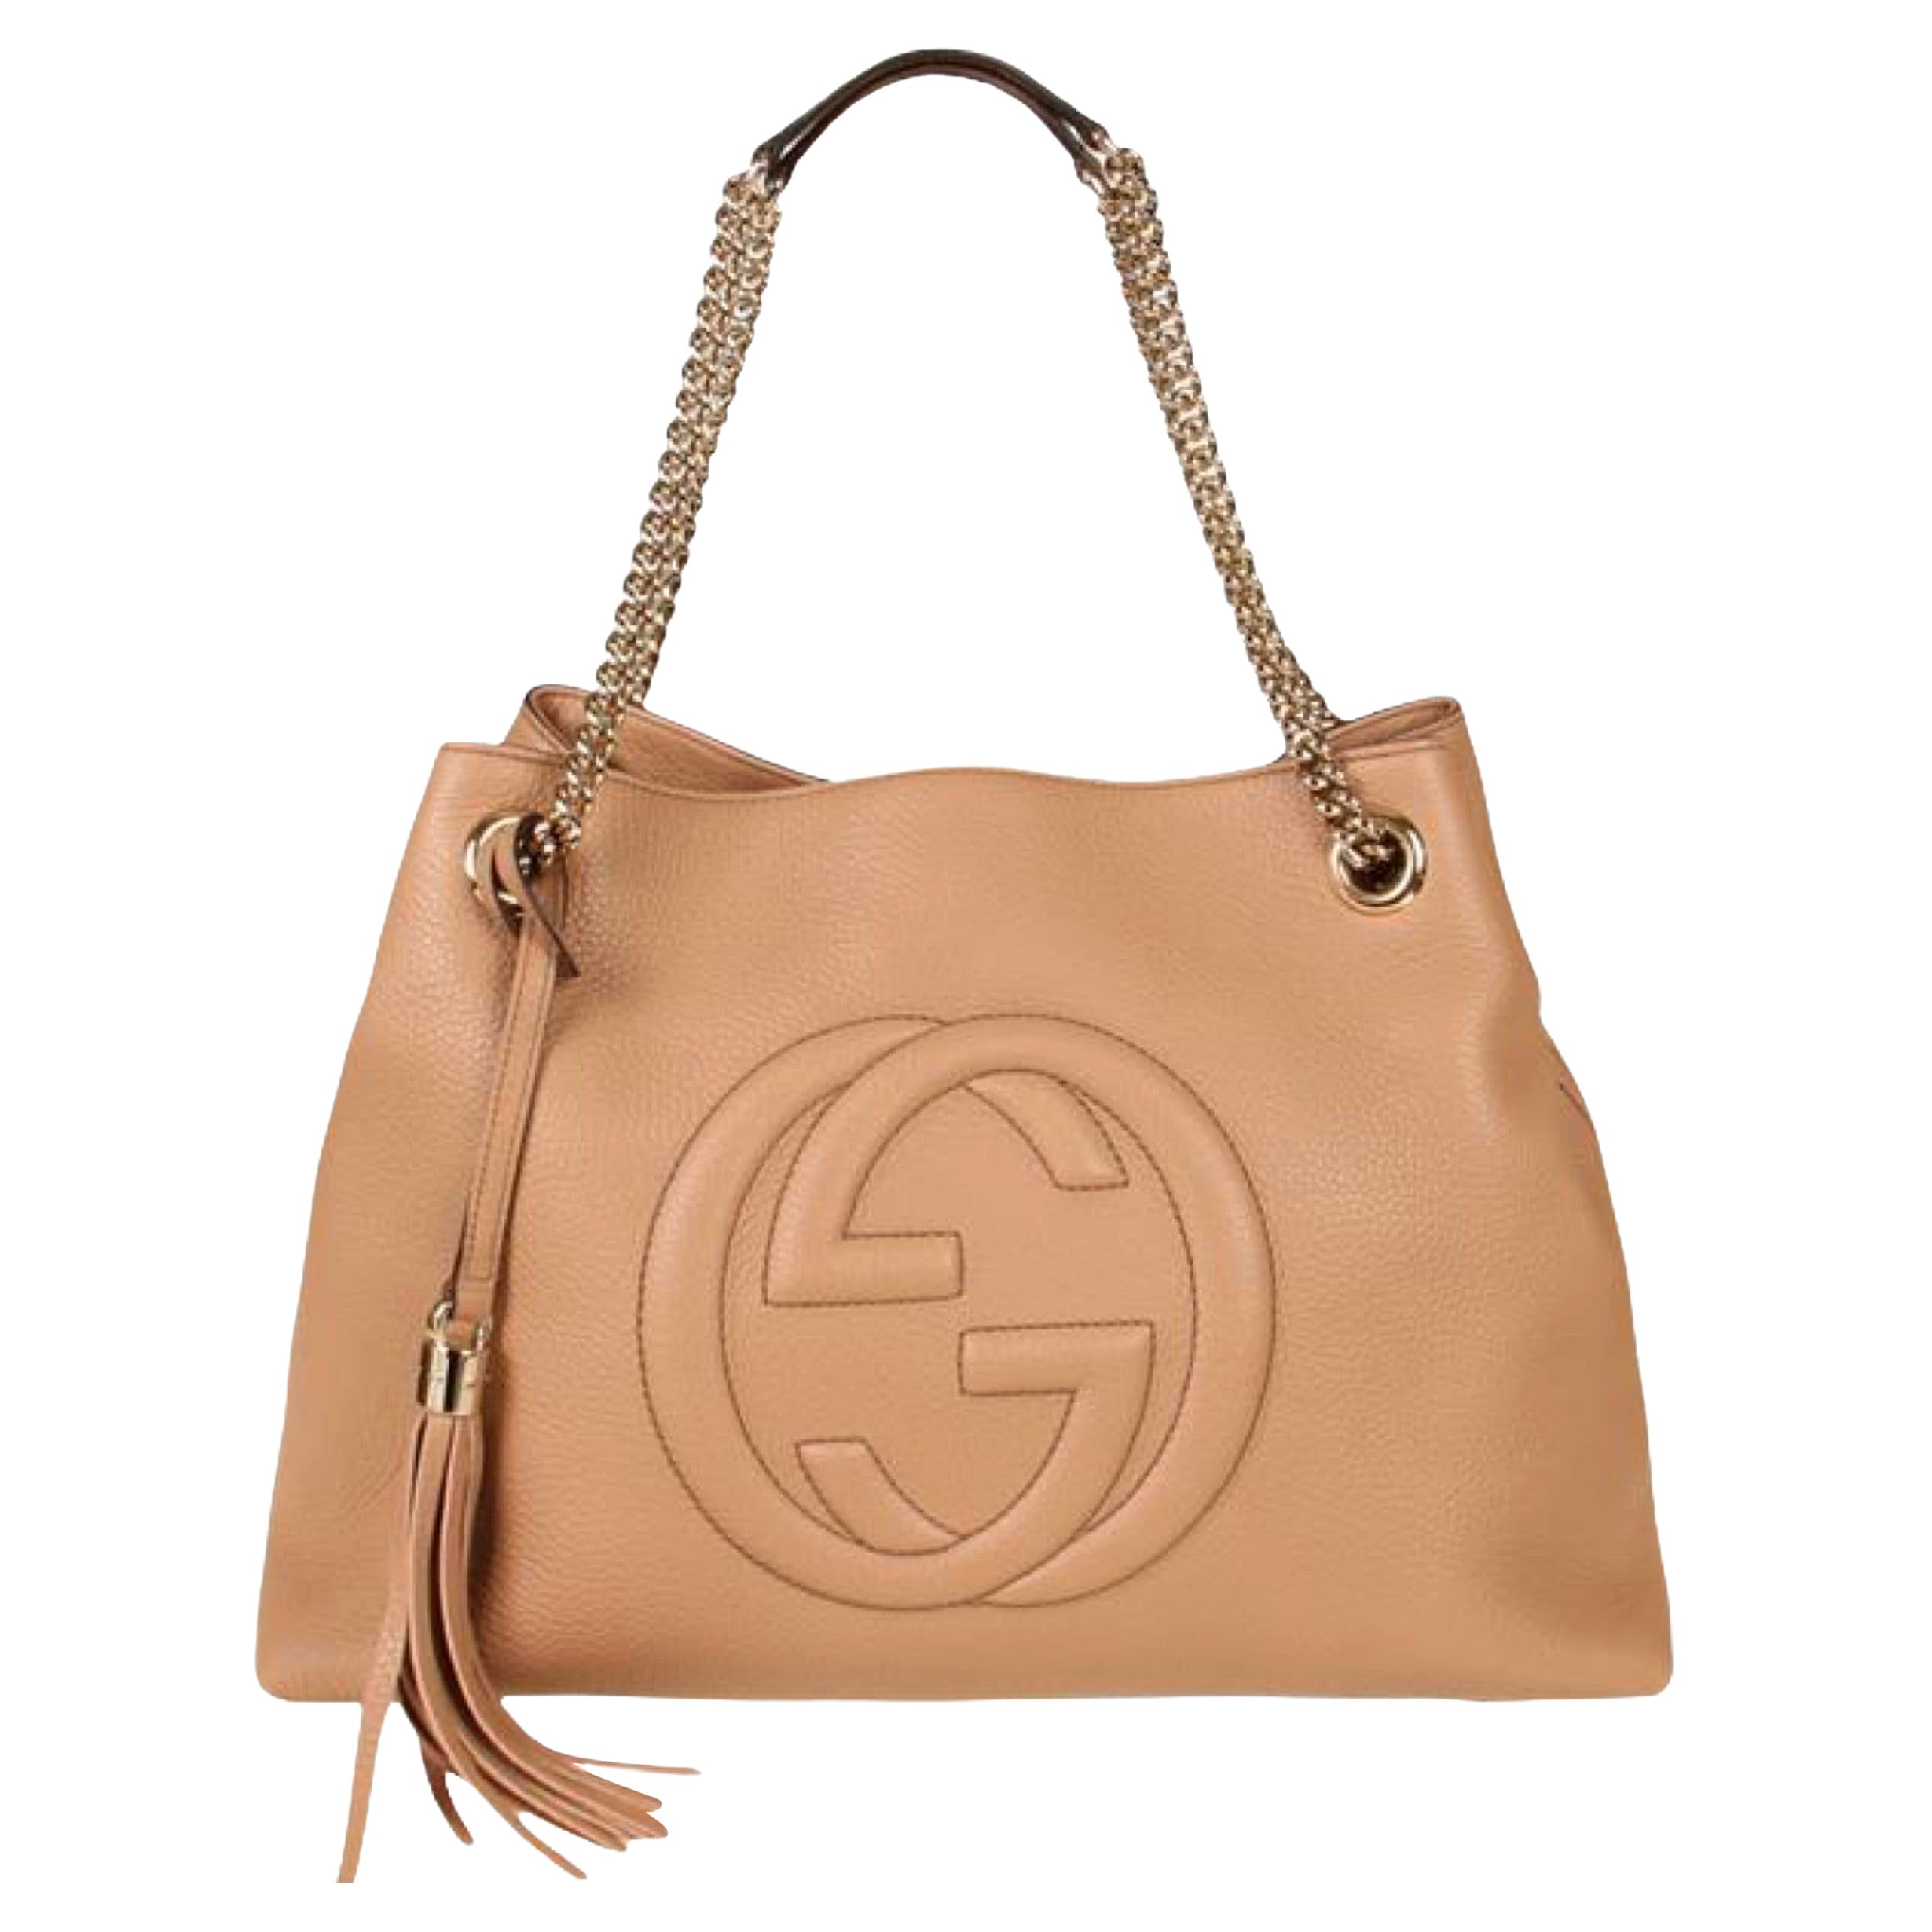 NEW Gucci Beige Pebbled Leather Medium Soho Chain Tote Shoulder Bag For Sale